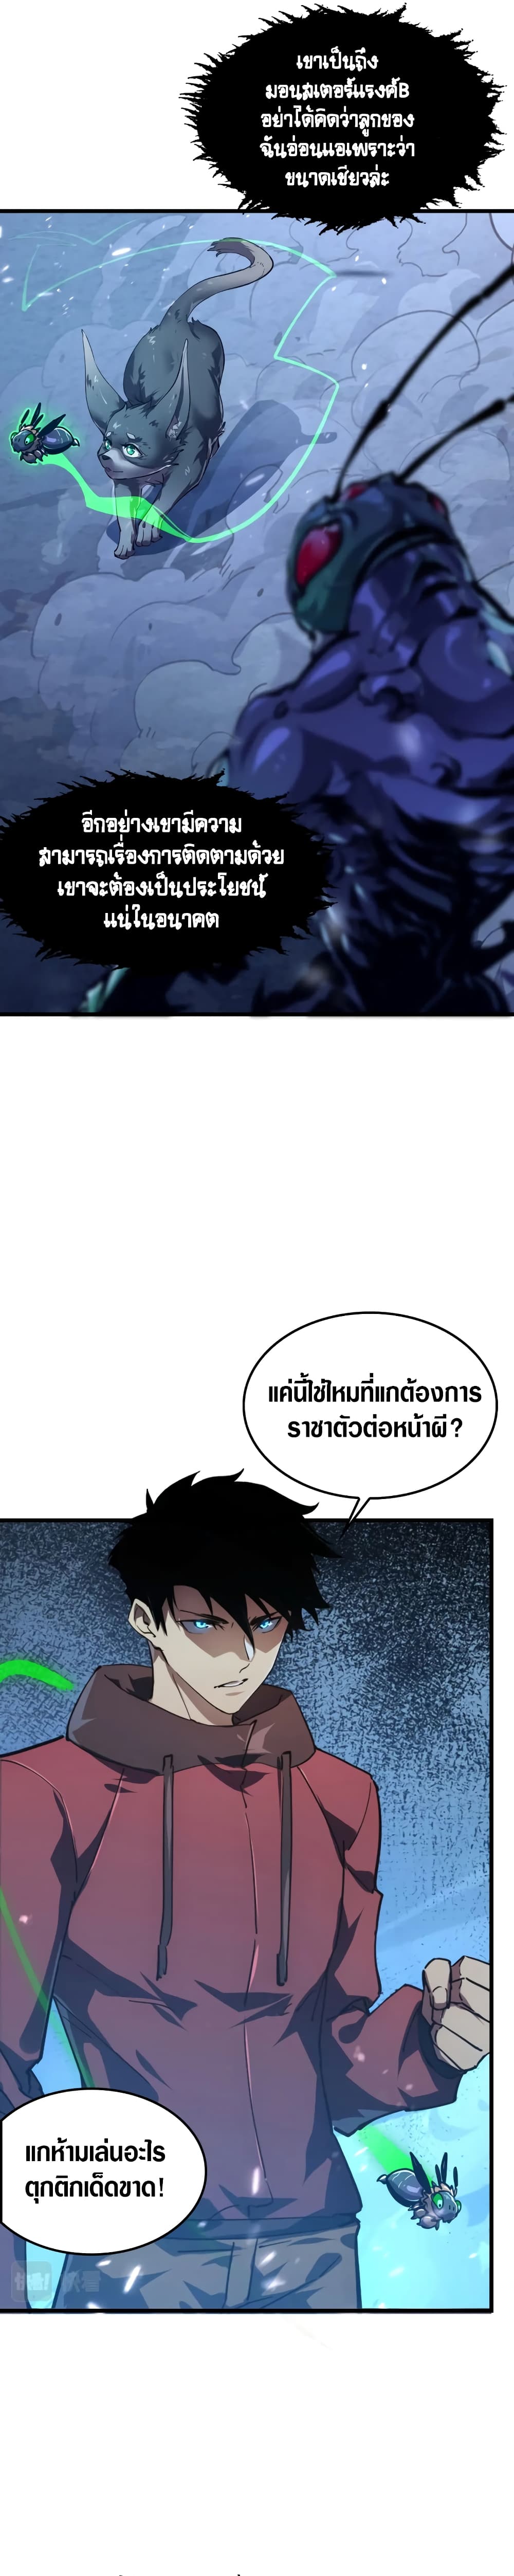 Rise From The Rubble เศษซากวันสิ้นโลก 147-147